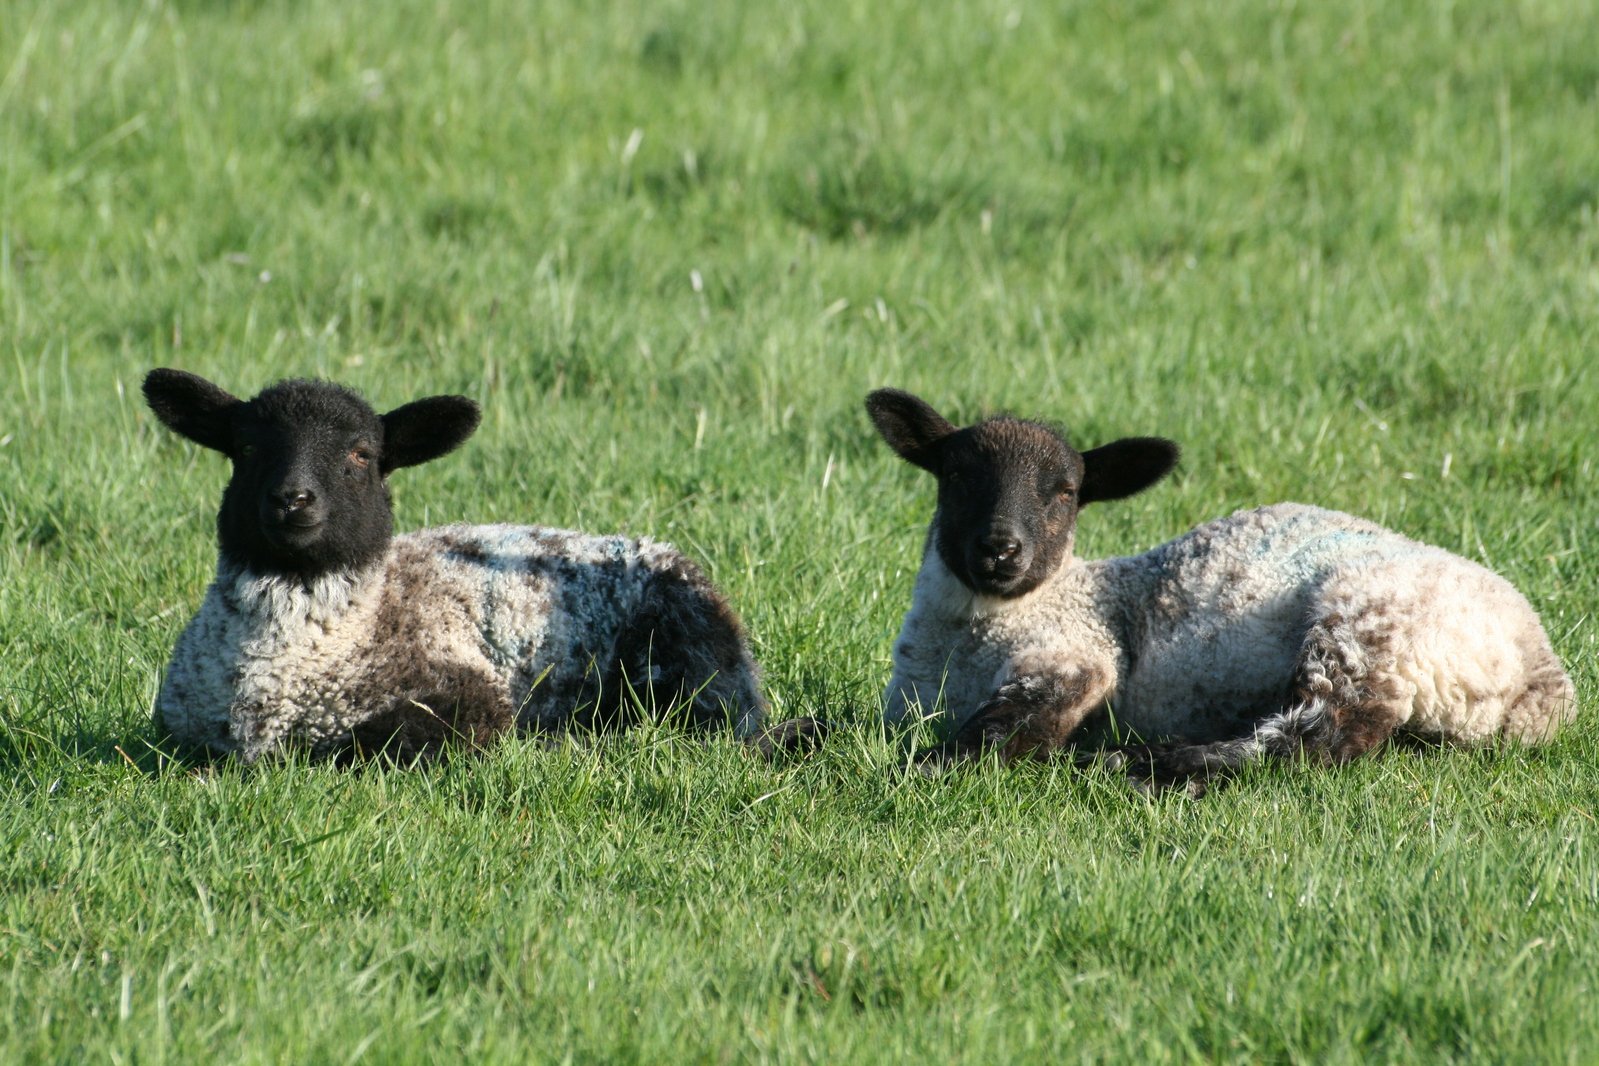 a pair of lambs laying in a grassy field